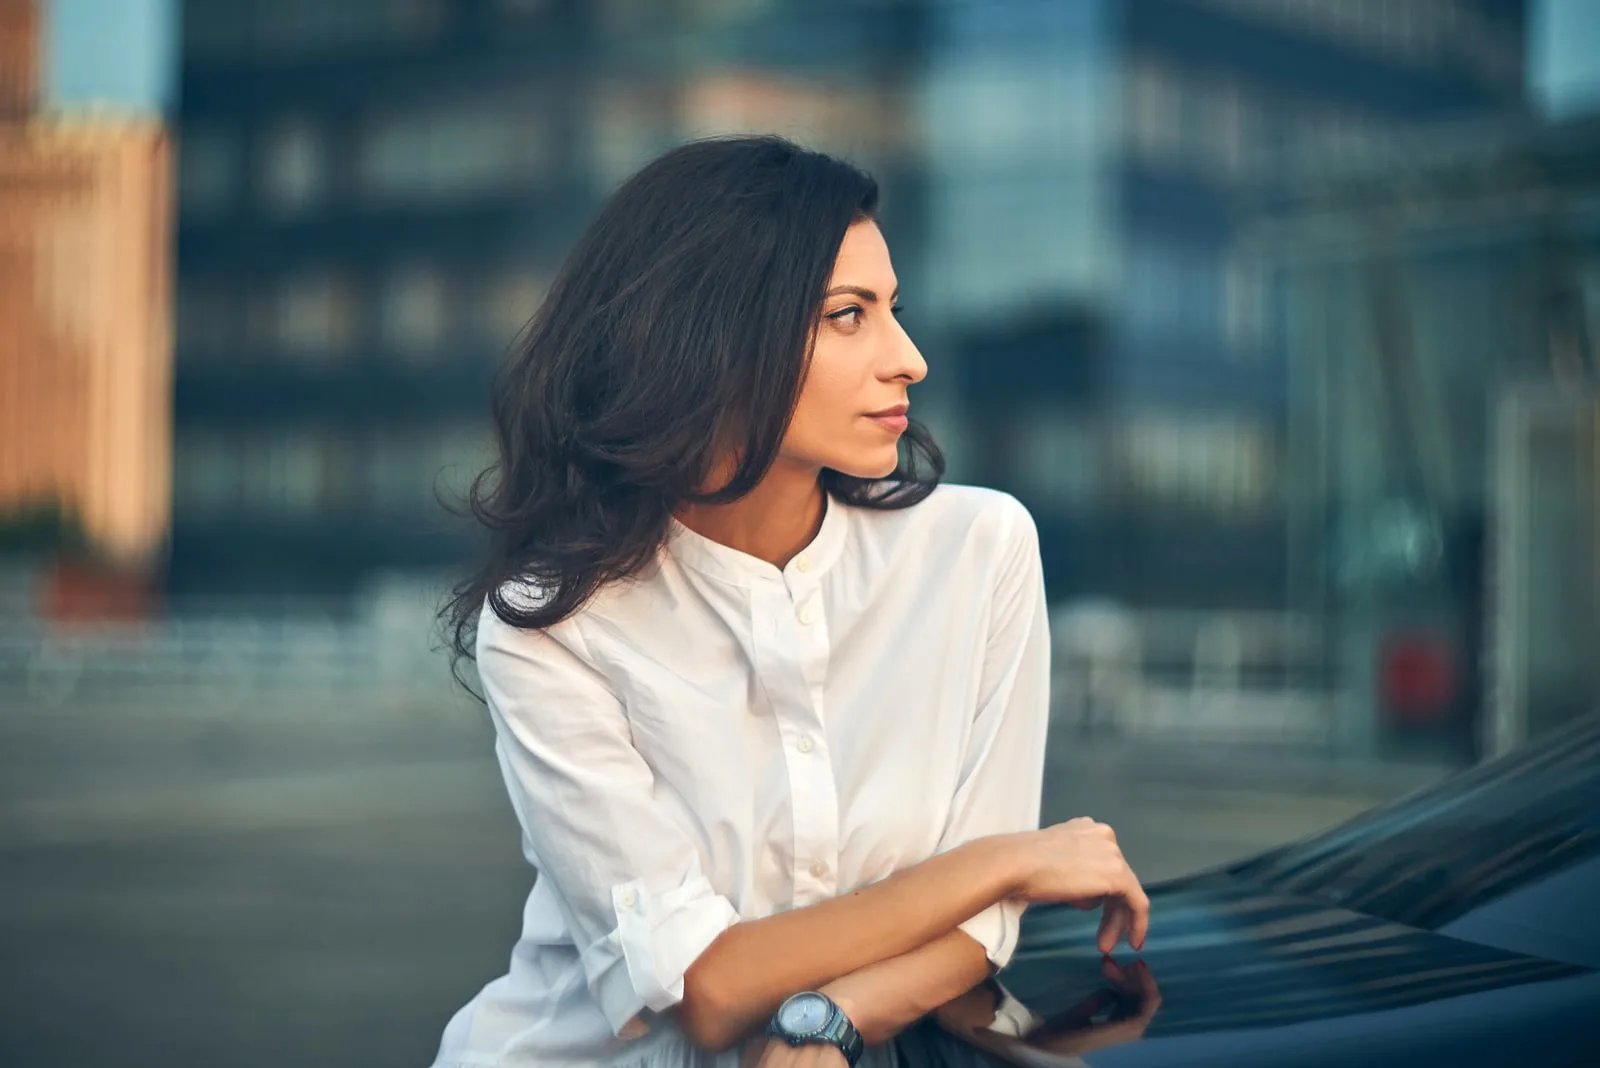 business woman standing outdoors leaning on the car